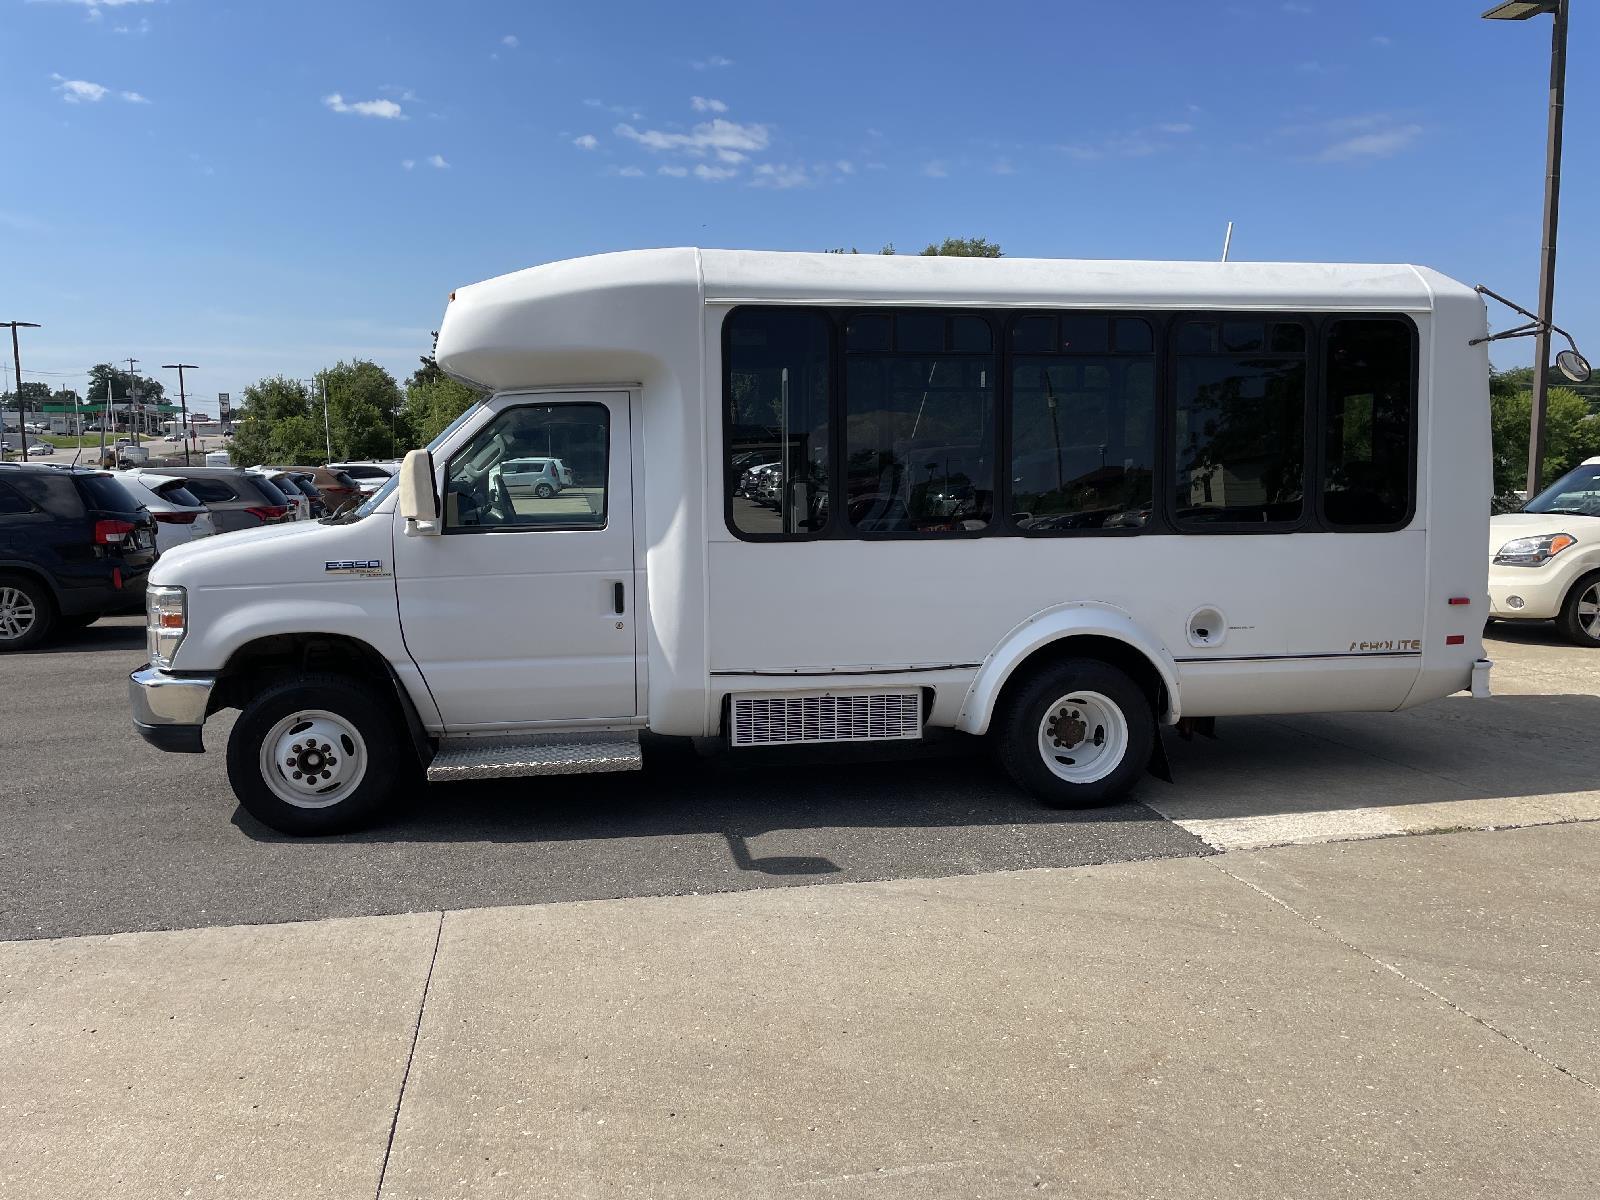 Used 2012 Ford Econoline Commercial Cutaway  cutaway for sale in St Joseph MO